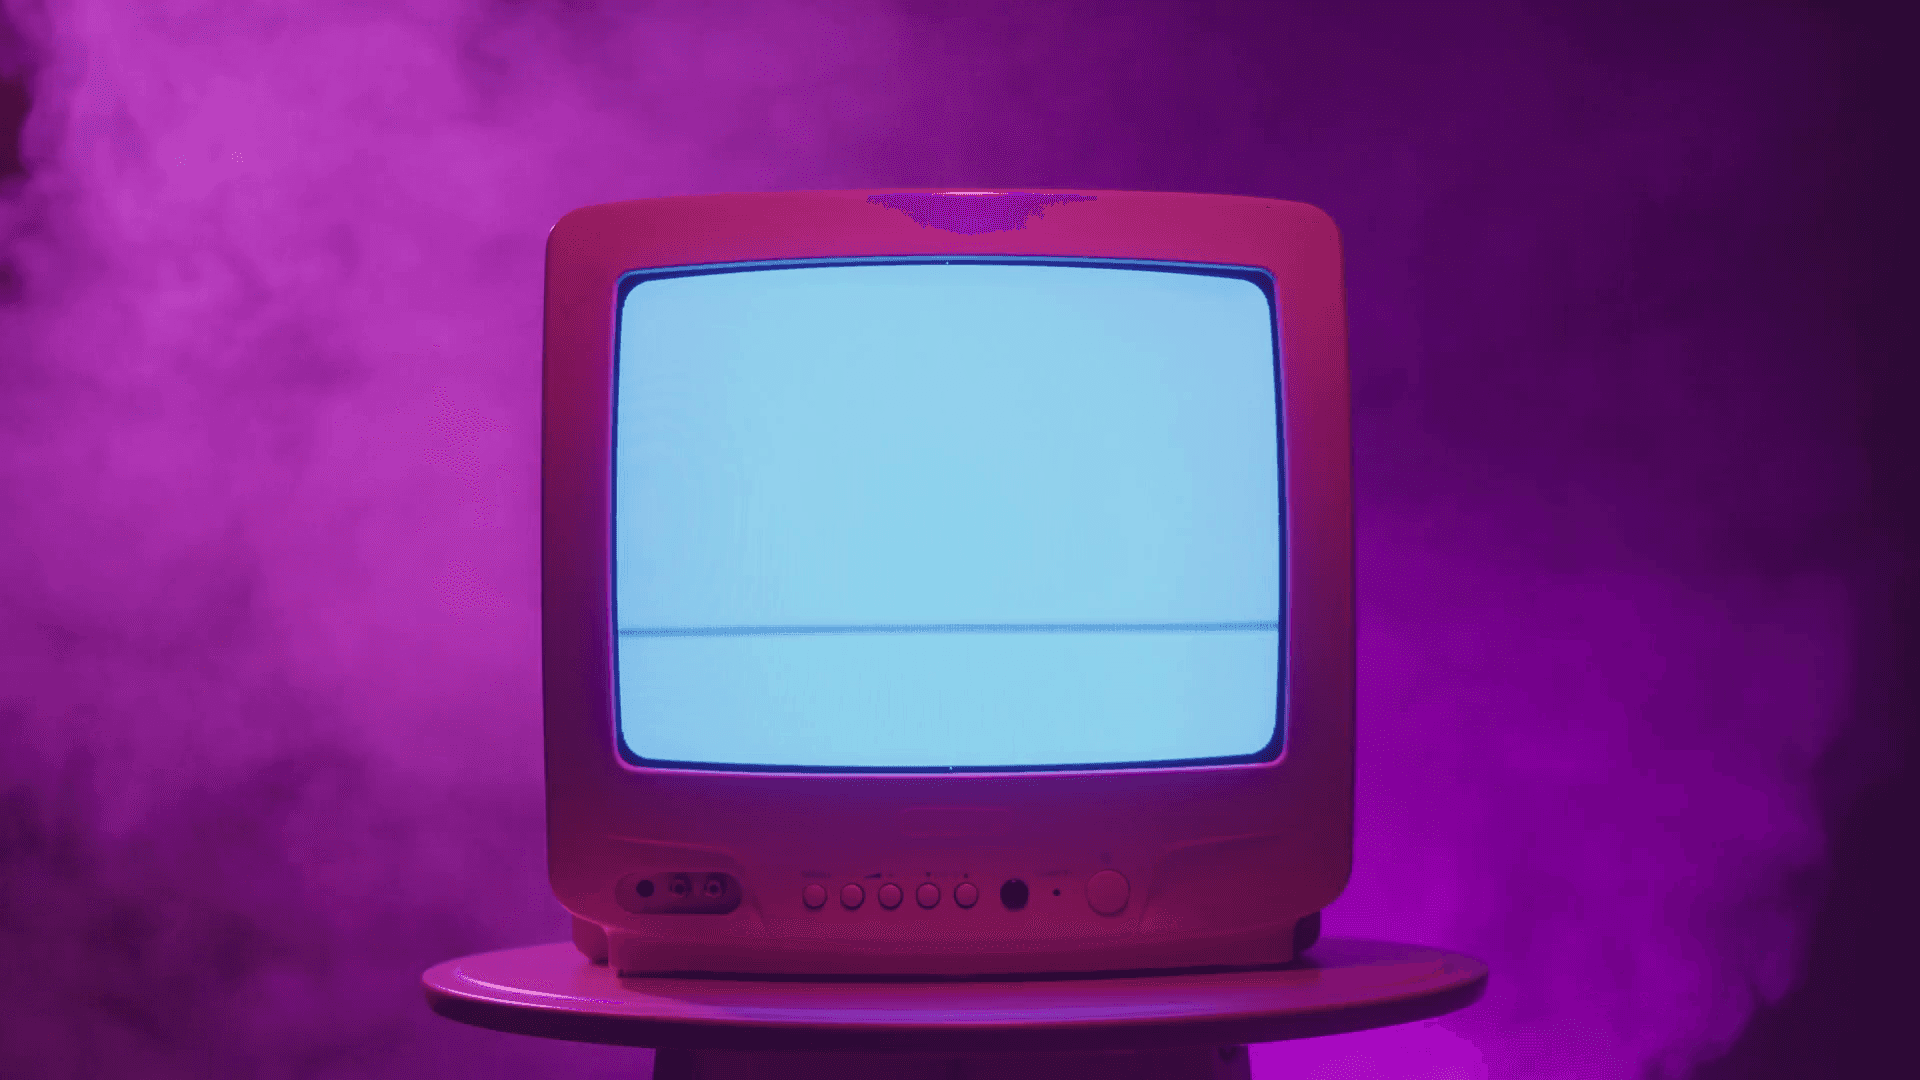 Download A Computer With A Purple Screen On Top Of A Table | Wallpapers.com